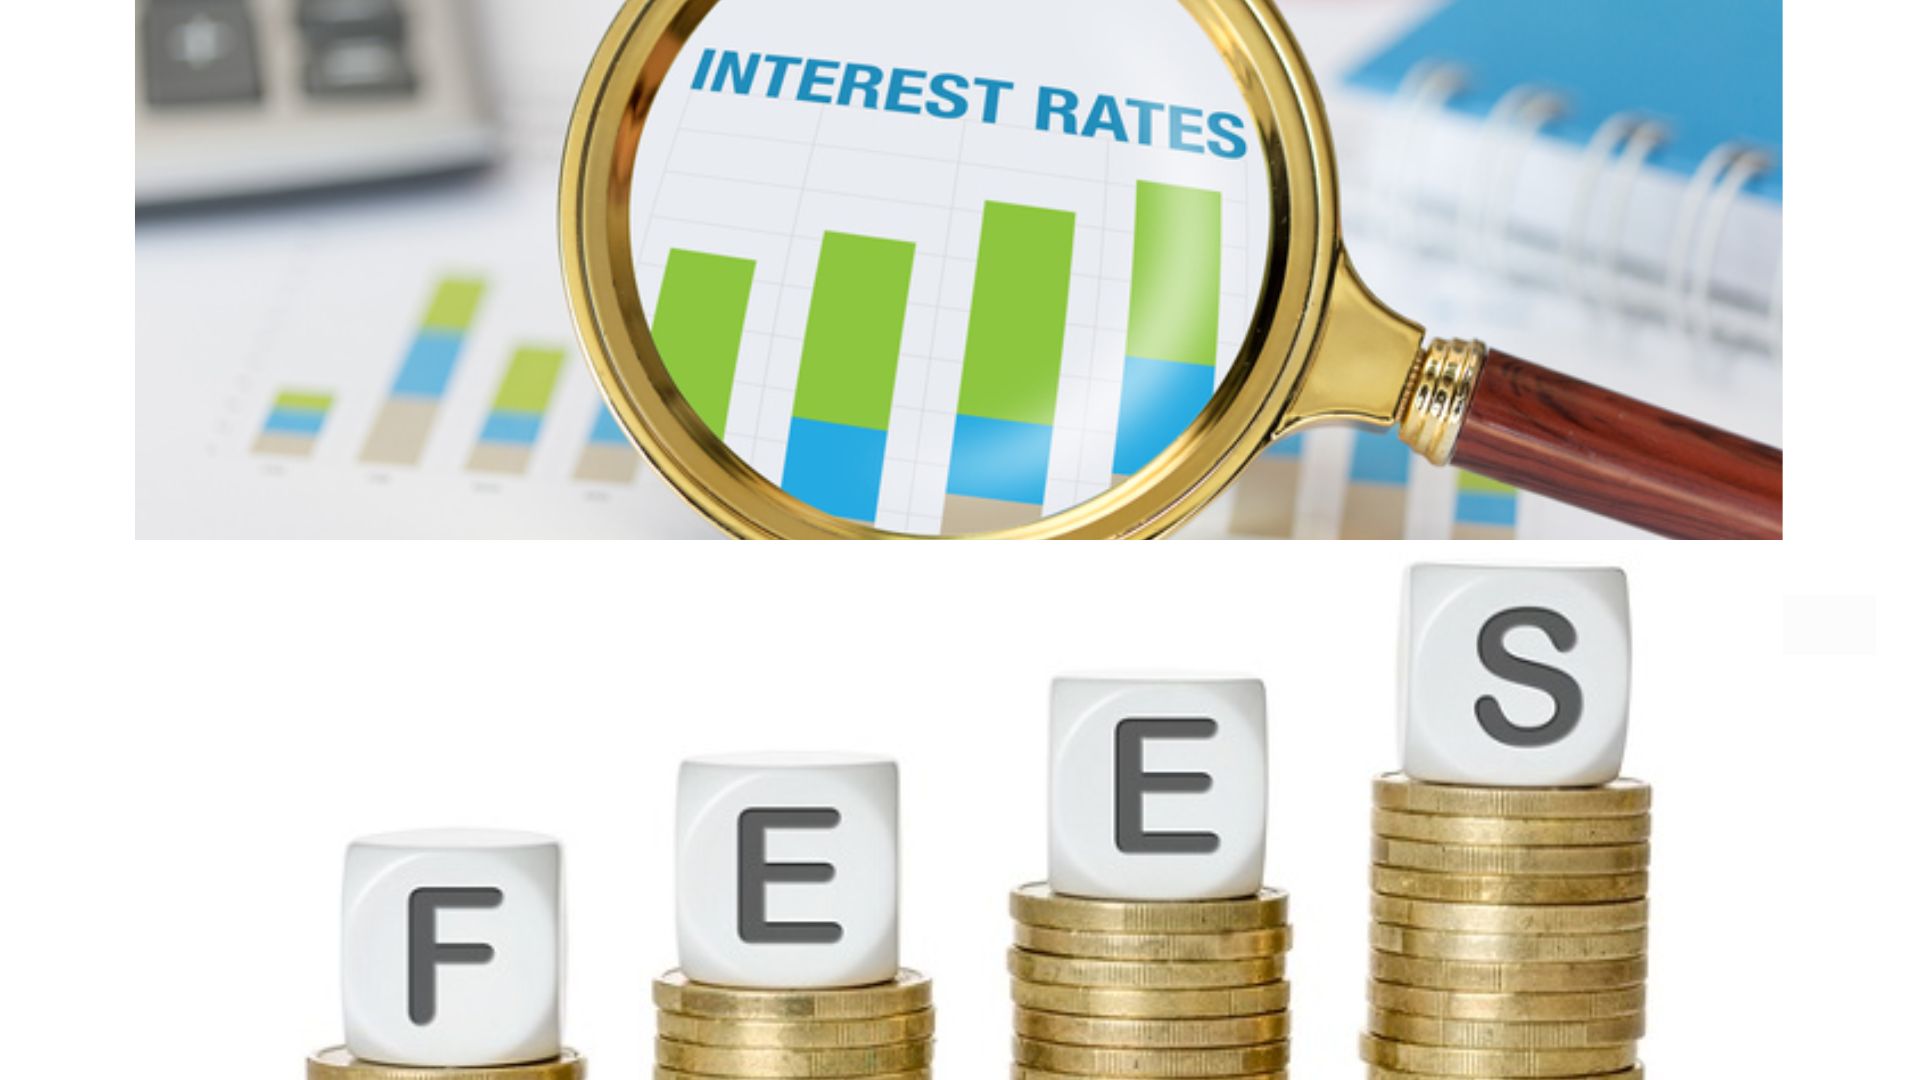 Fees and Interest Rates